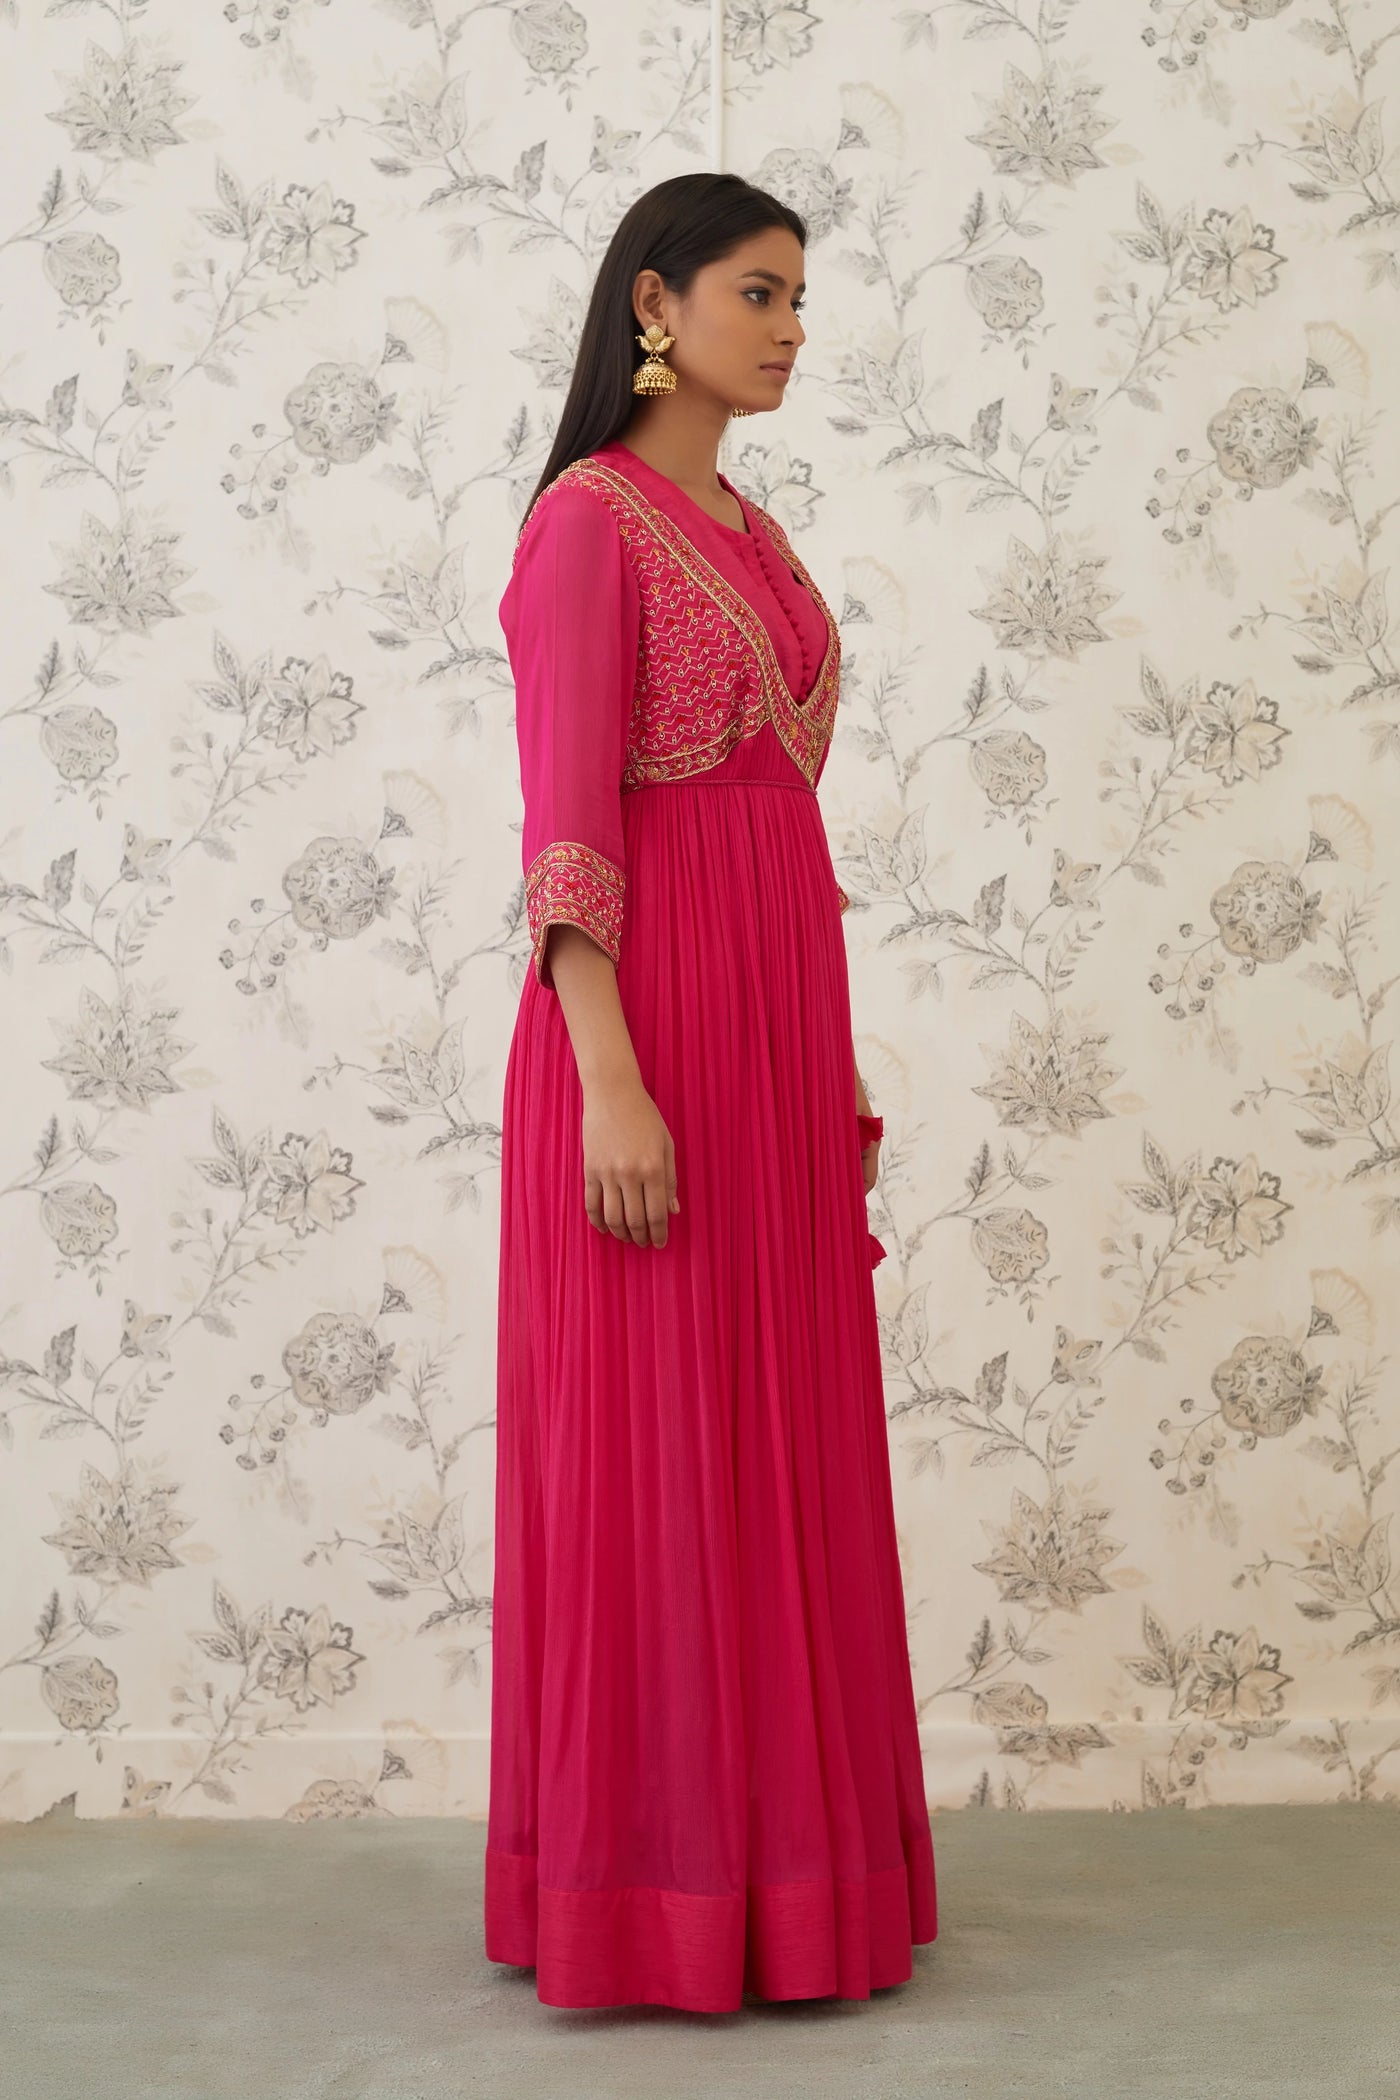 Hot Pink Angrakha Set Indian Clothing in Denver, CO, Aurora, CO, Boulder, CO, Fort Collins, CO, Colorado Springs, CO, Parker, CO, Highlands Ranch, CO, Cherry Creek, CO, Centennial, CO, and Longmont, CO. NATIONWIDE SHIPPING USA- India Fashion X